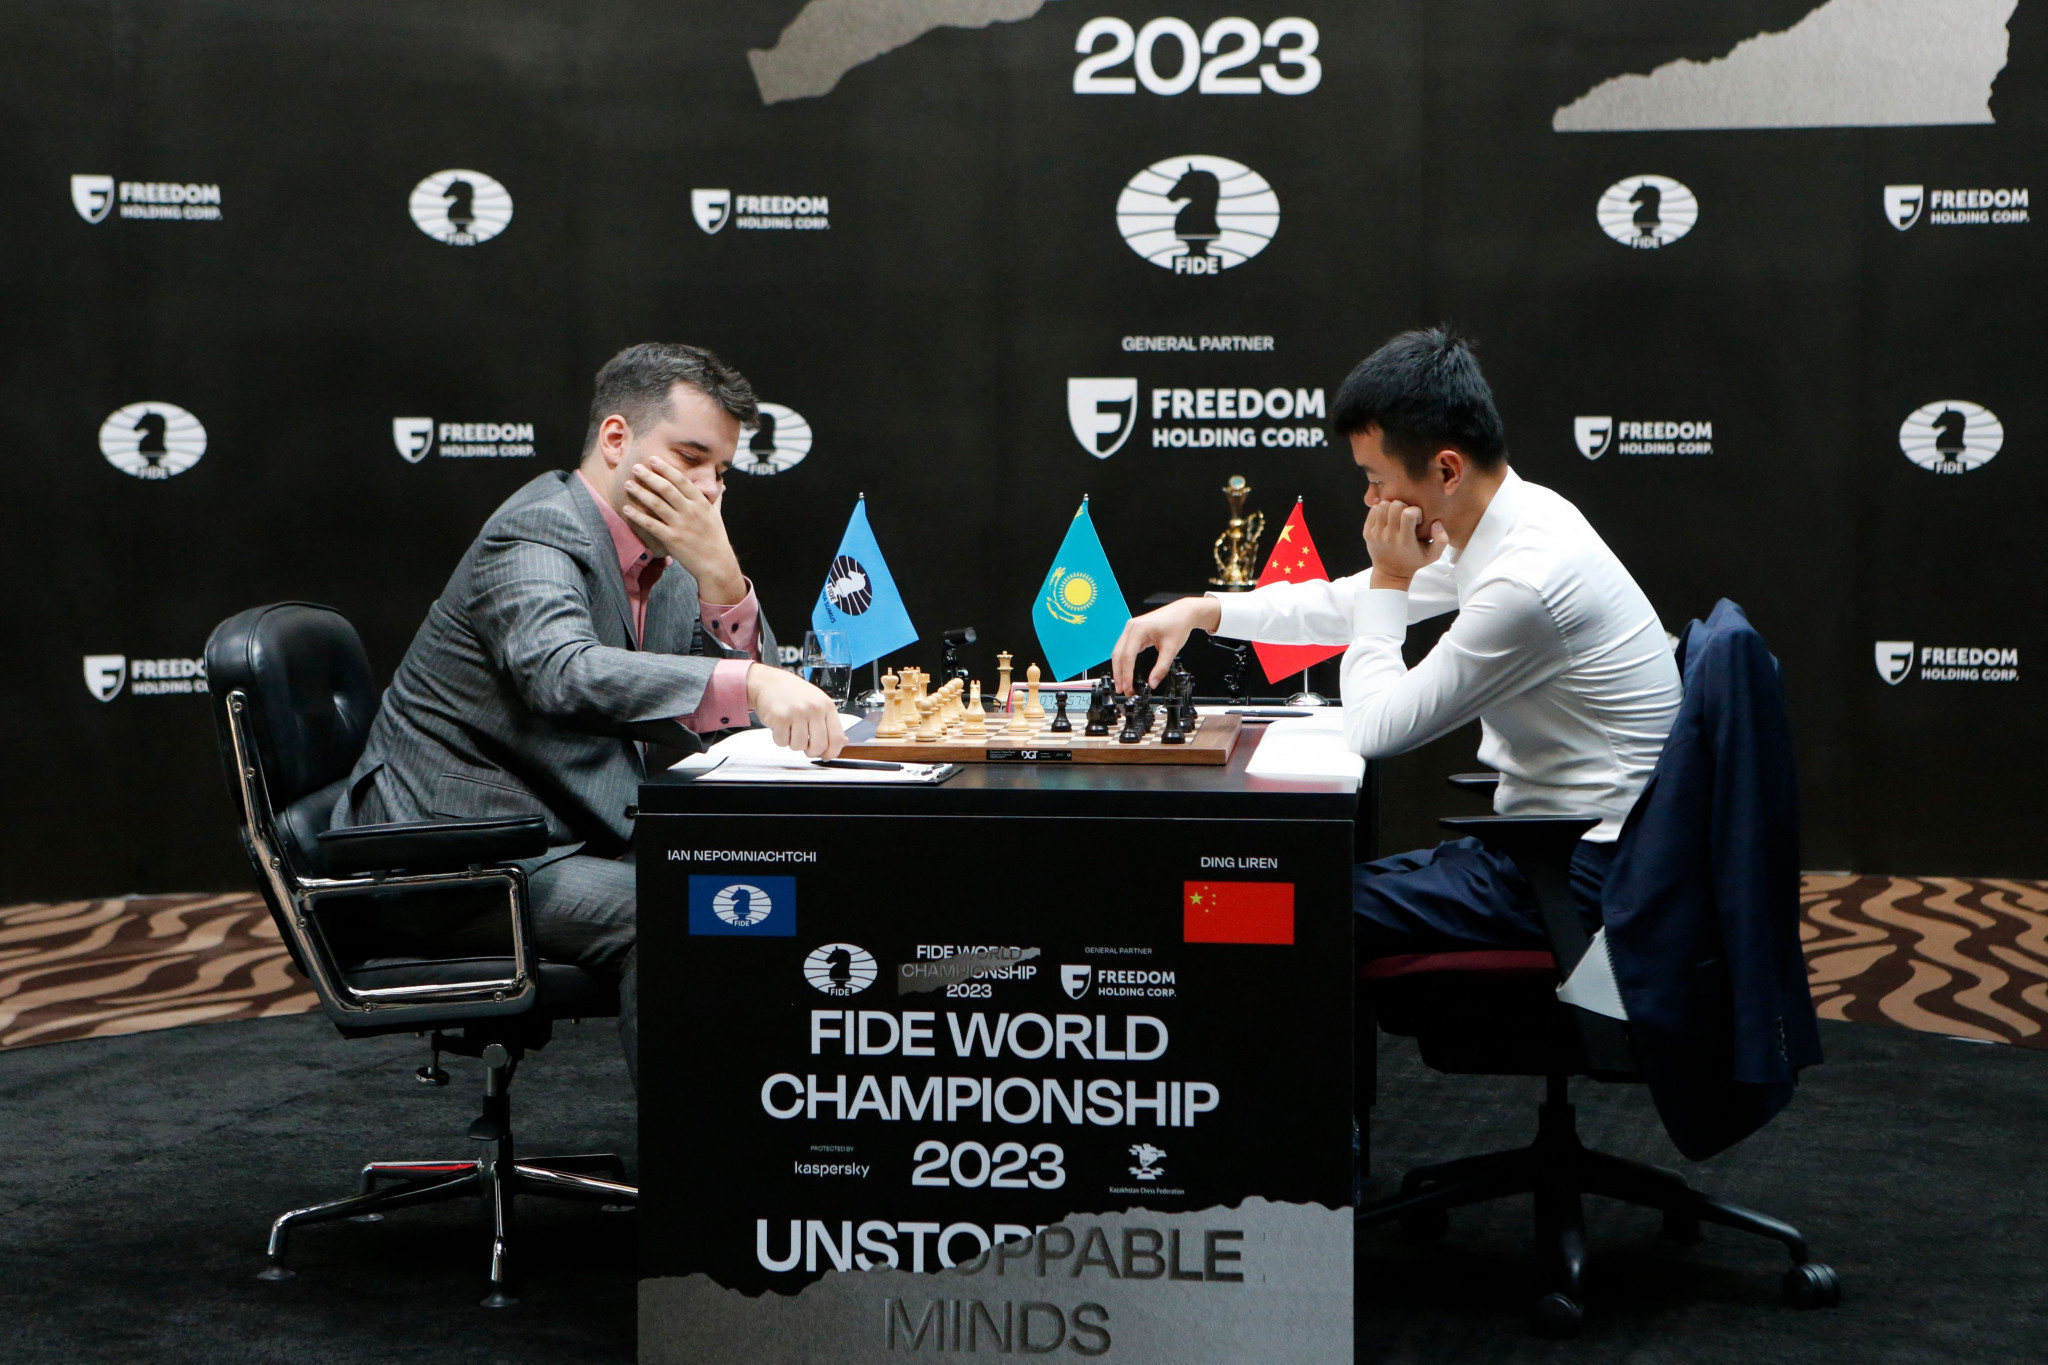 The first game of the FIDE World Championship Match between Ding Liren and Ian Nepomniachtchi ended in a draw ©Getty Images